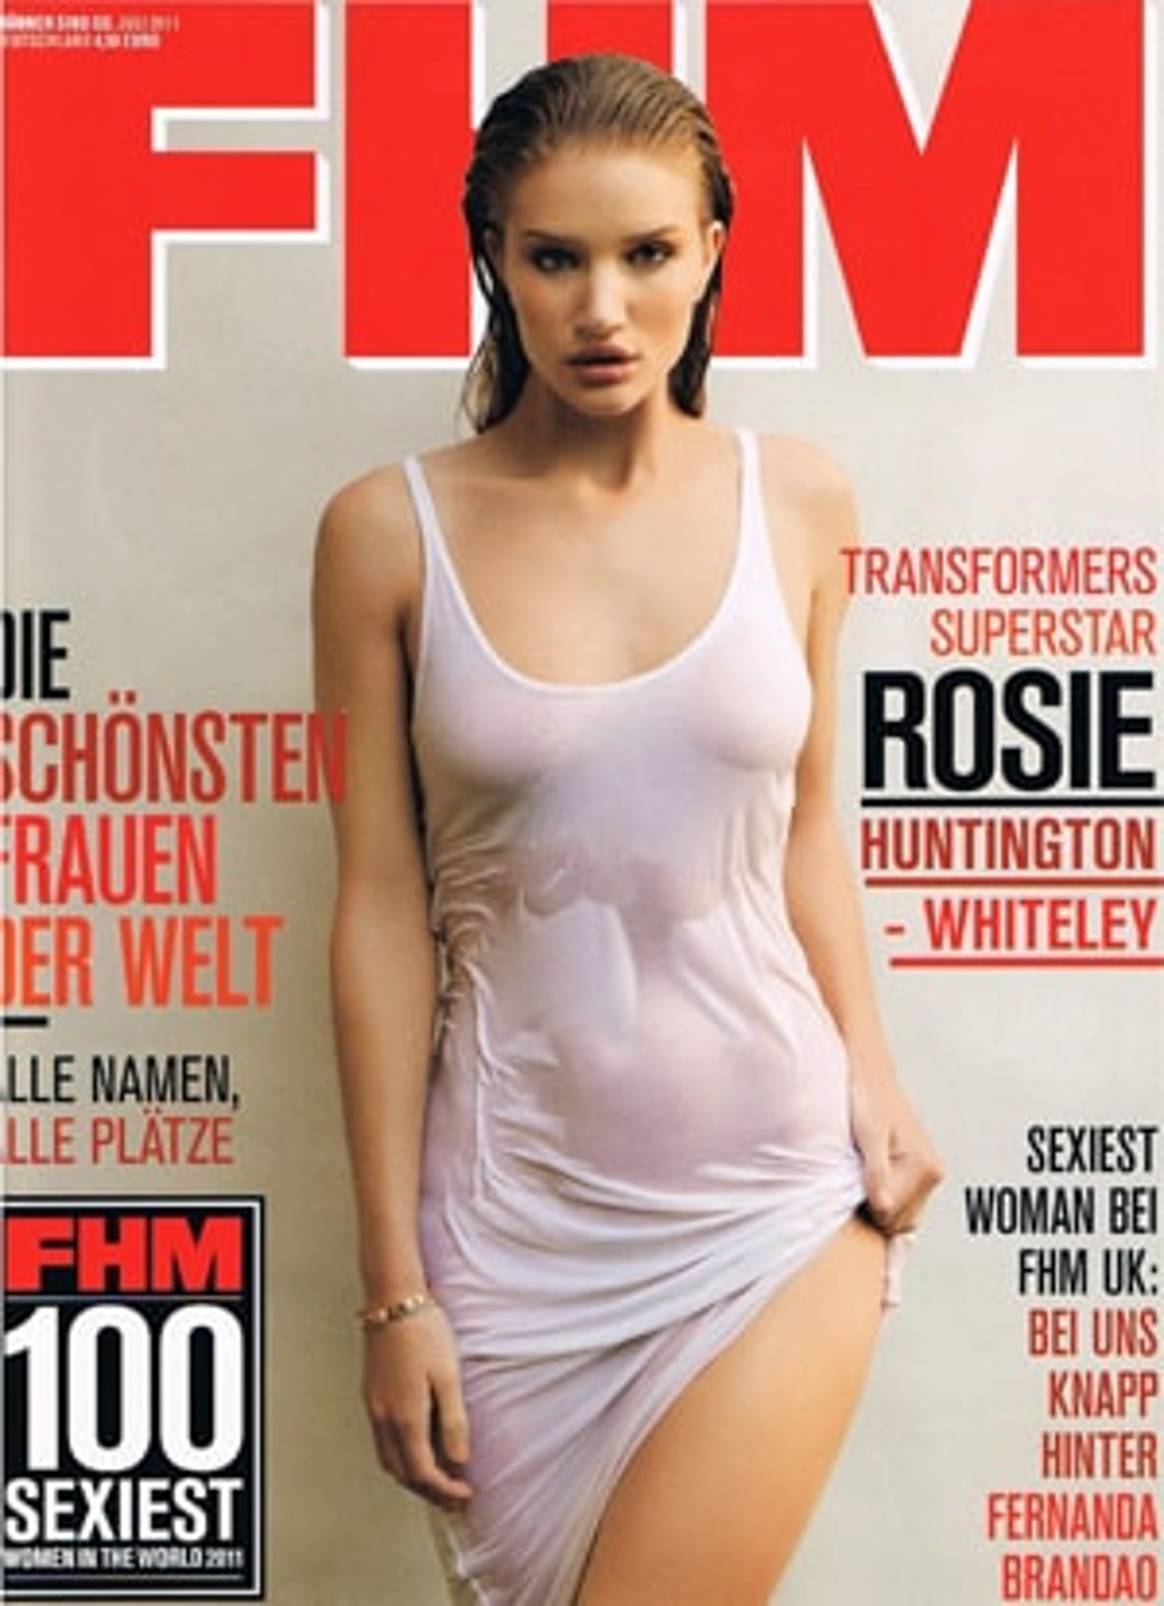 Men's fashion mags could face legal action